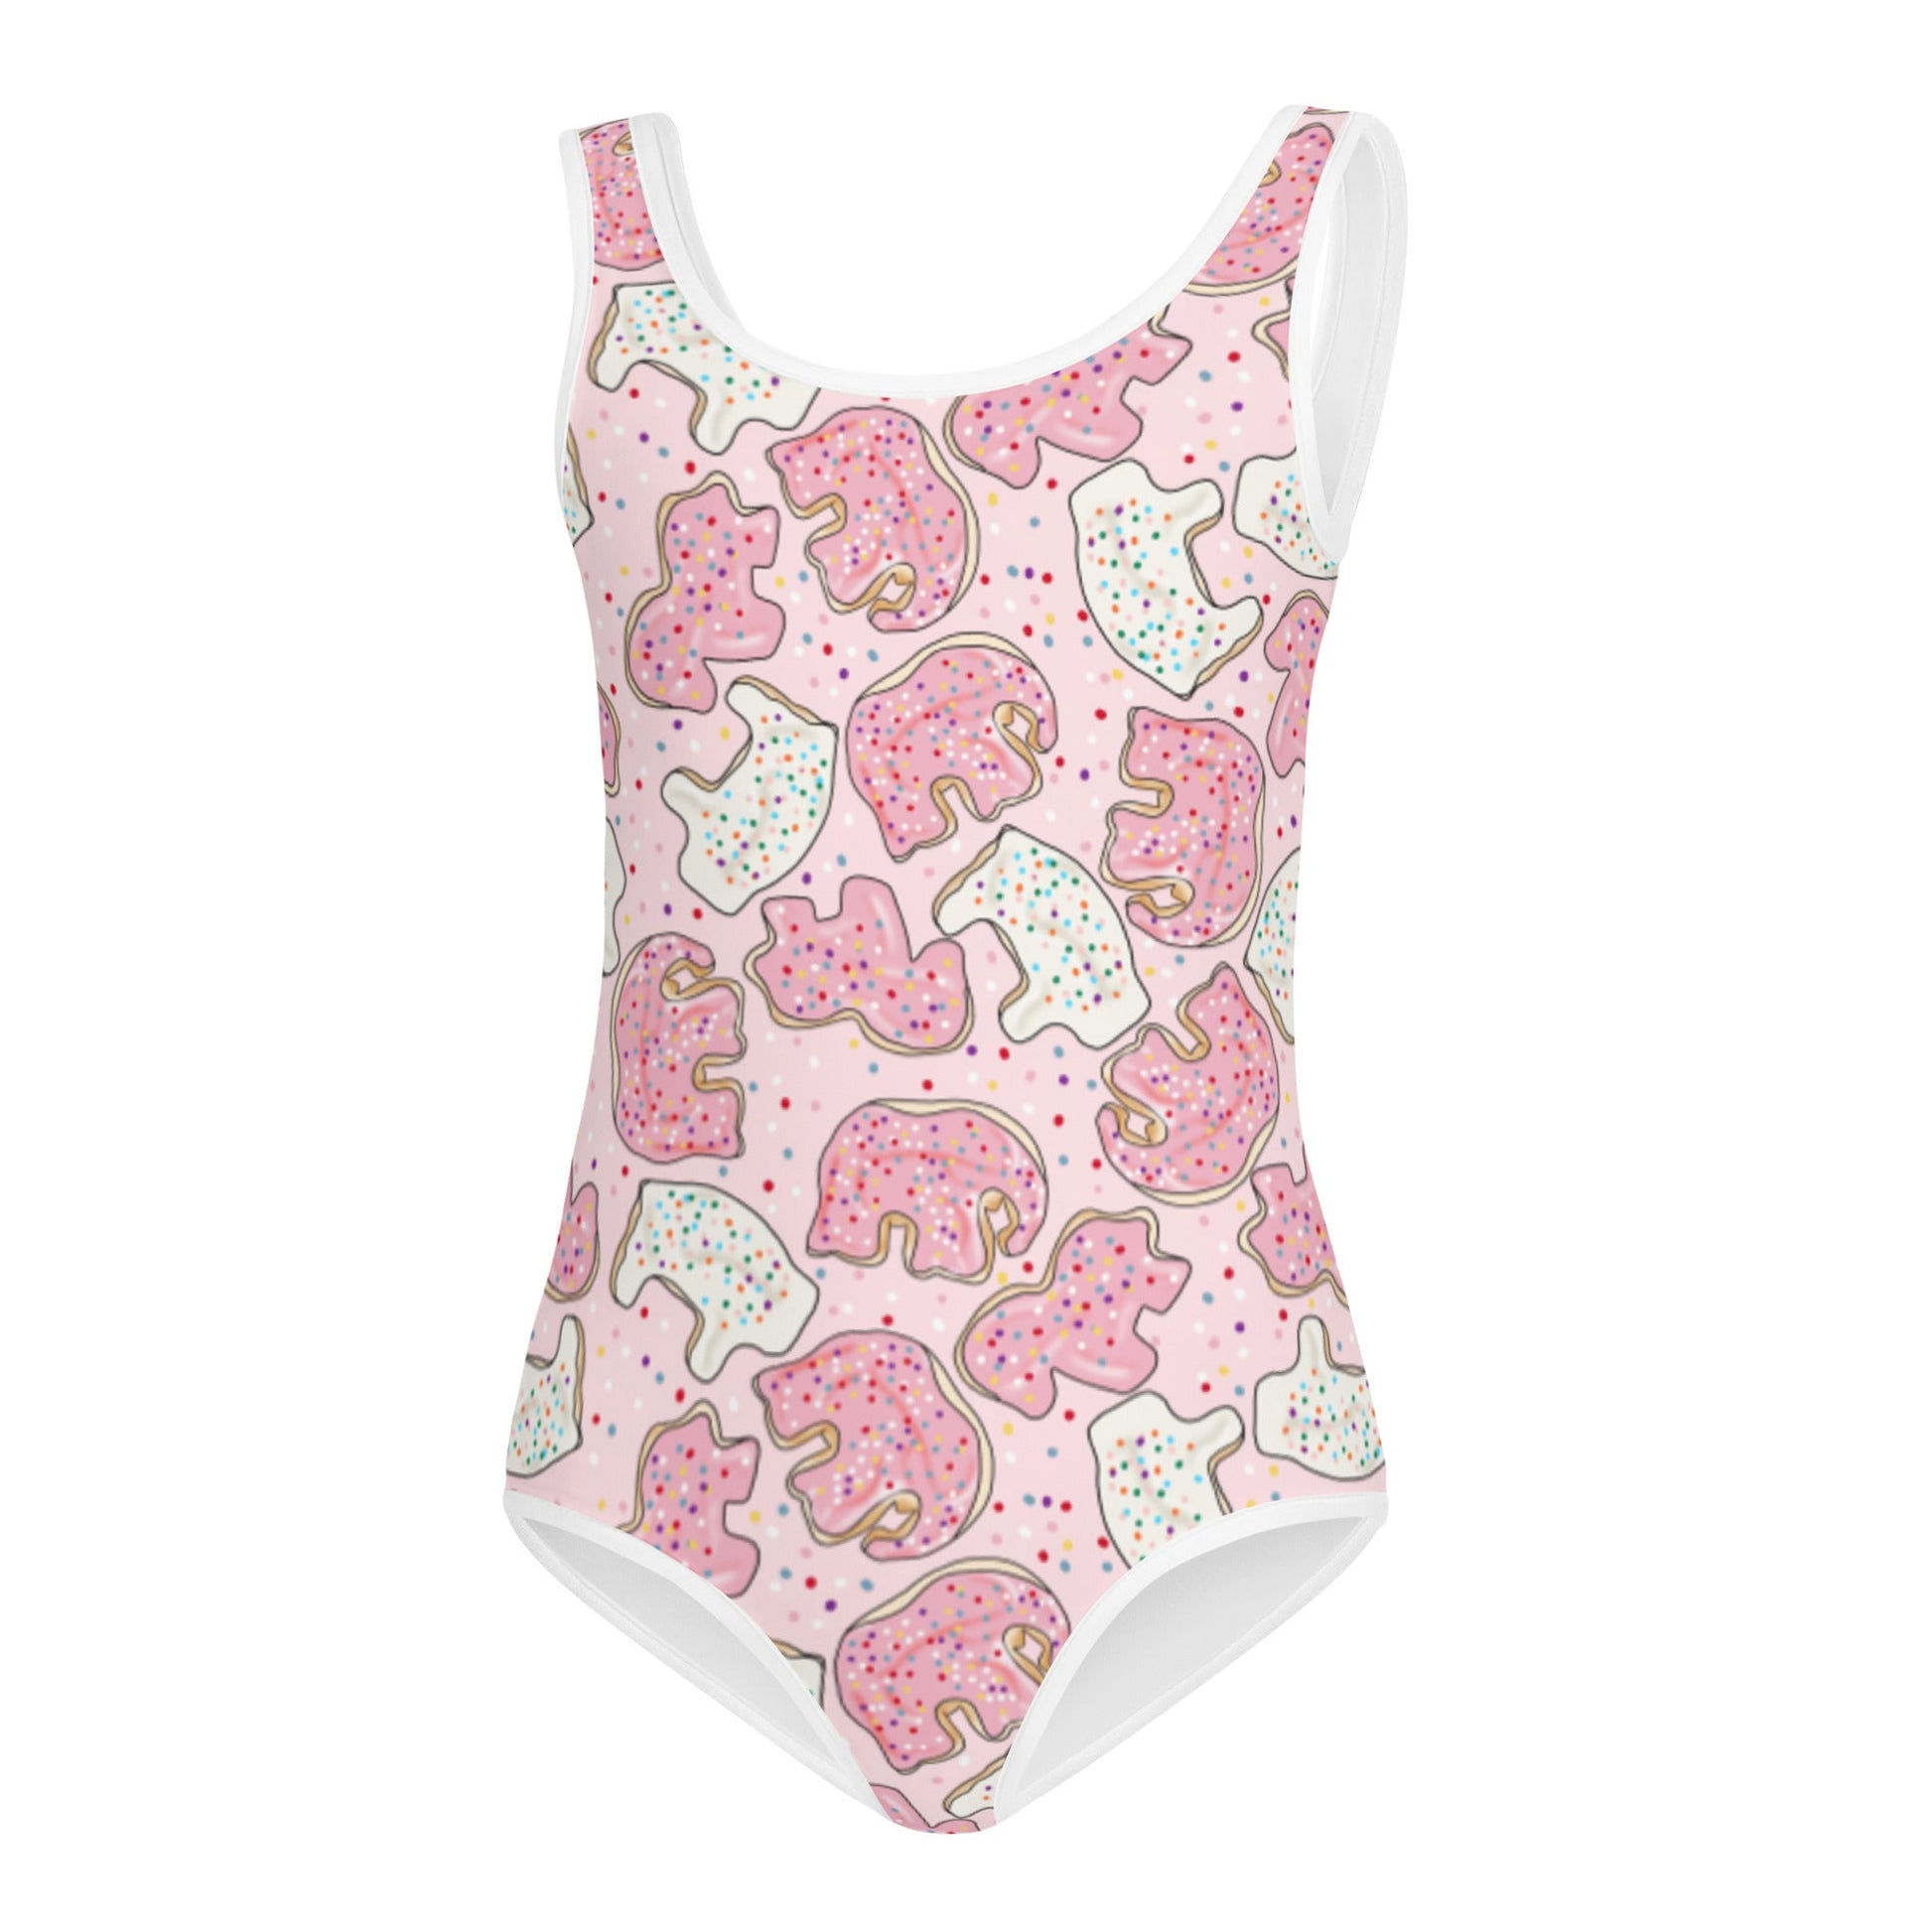 Vintage Cookies All-Over Print Kids Swimsuit happiness is addictiveLittle Lady Shay Boutique